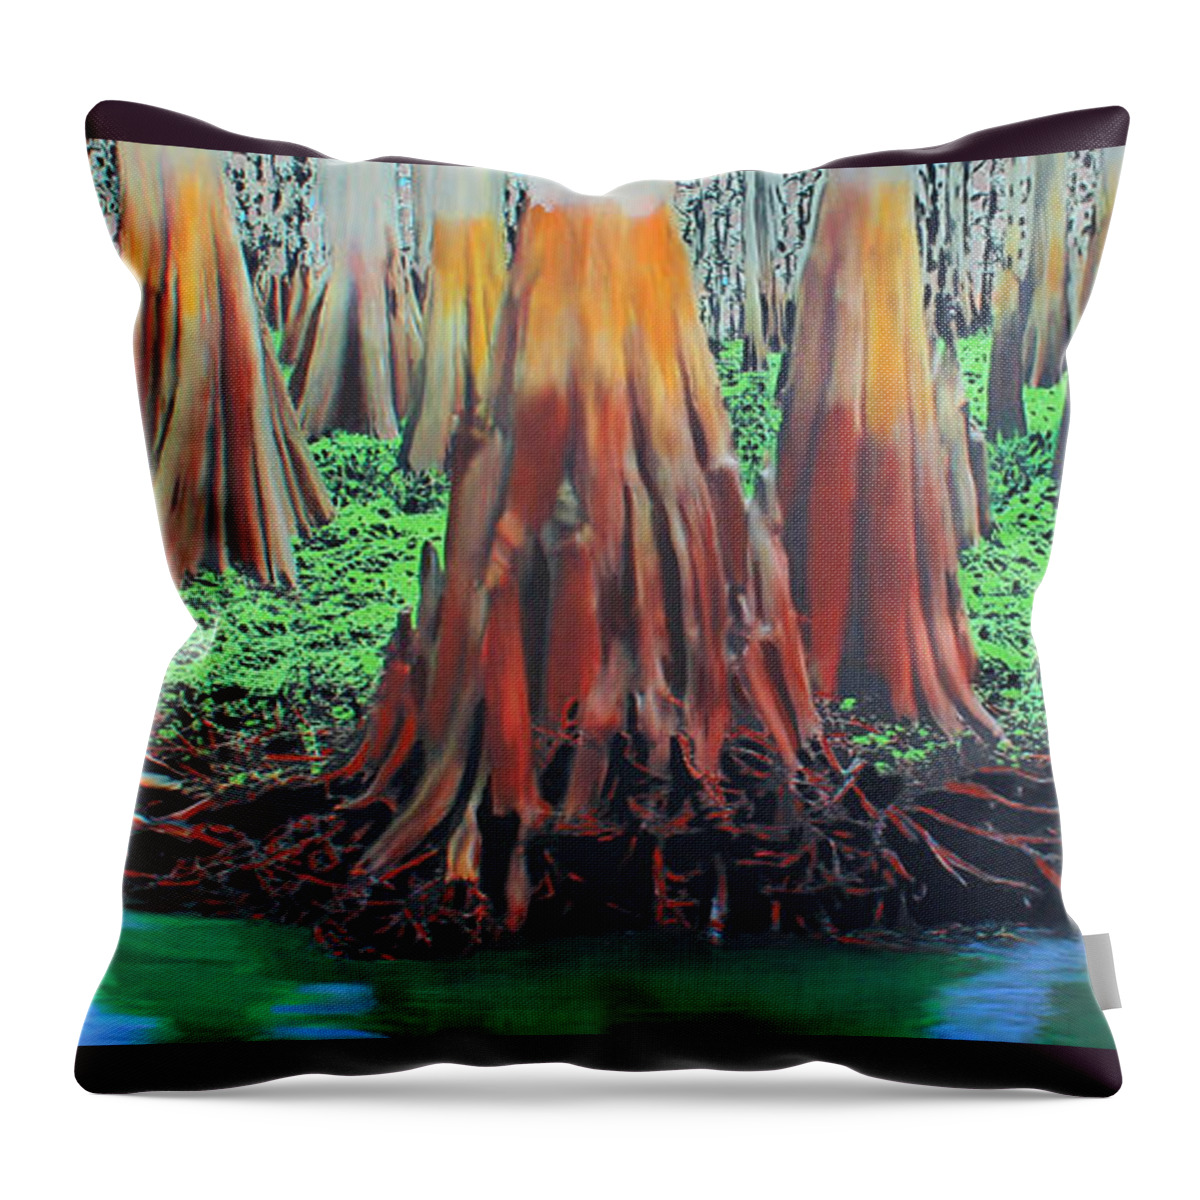 Cypress Throw Pillow featuring the painting Old Swampy by Deborah Boyd